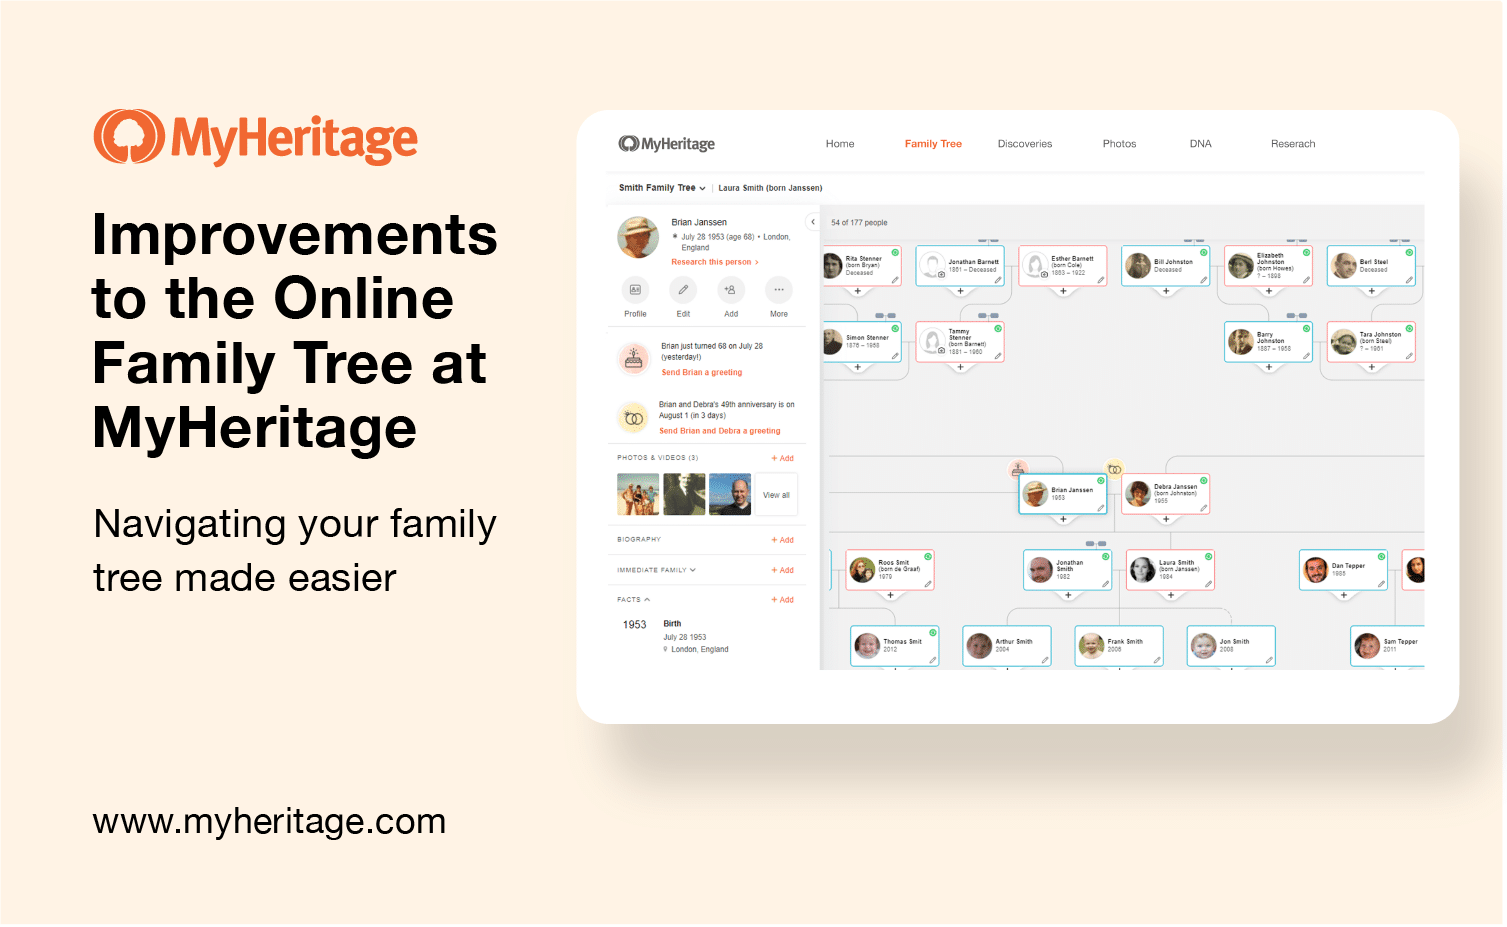 Improvements to the Online Family Tree at MyHeritage